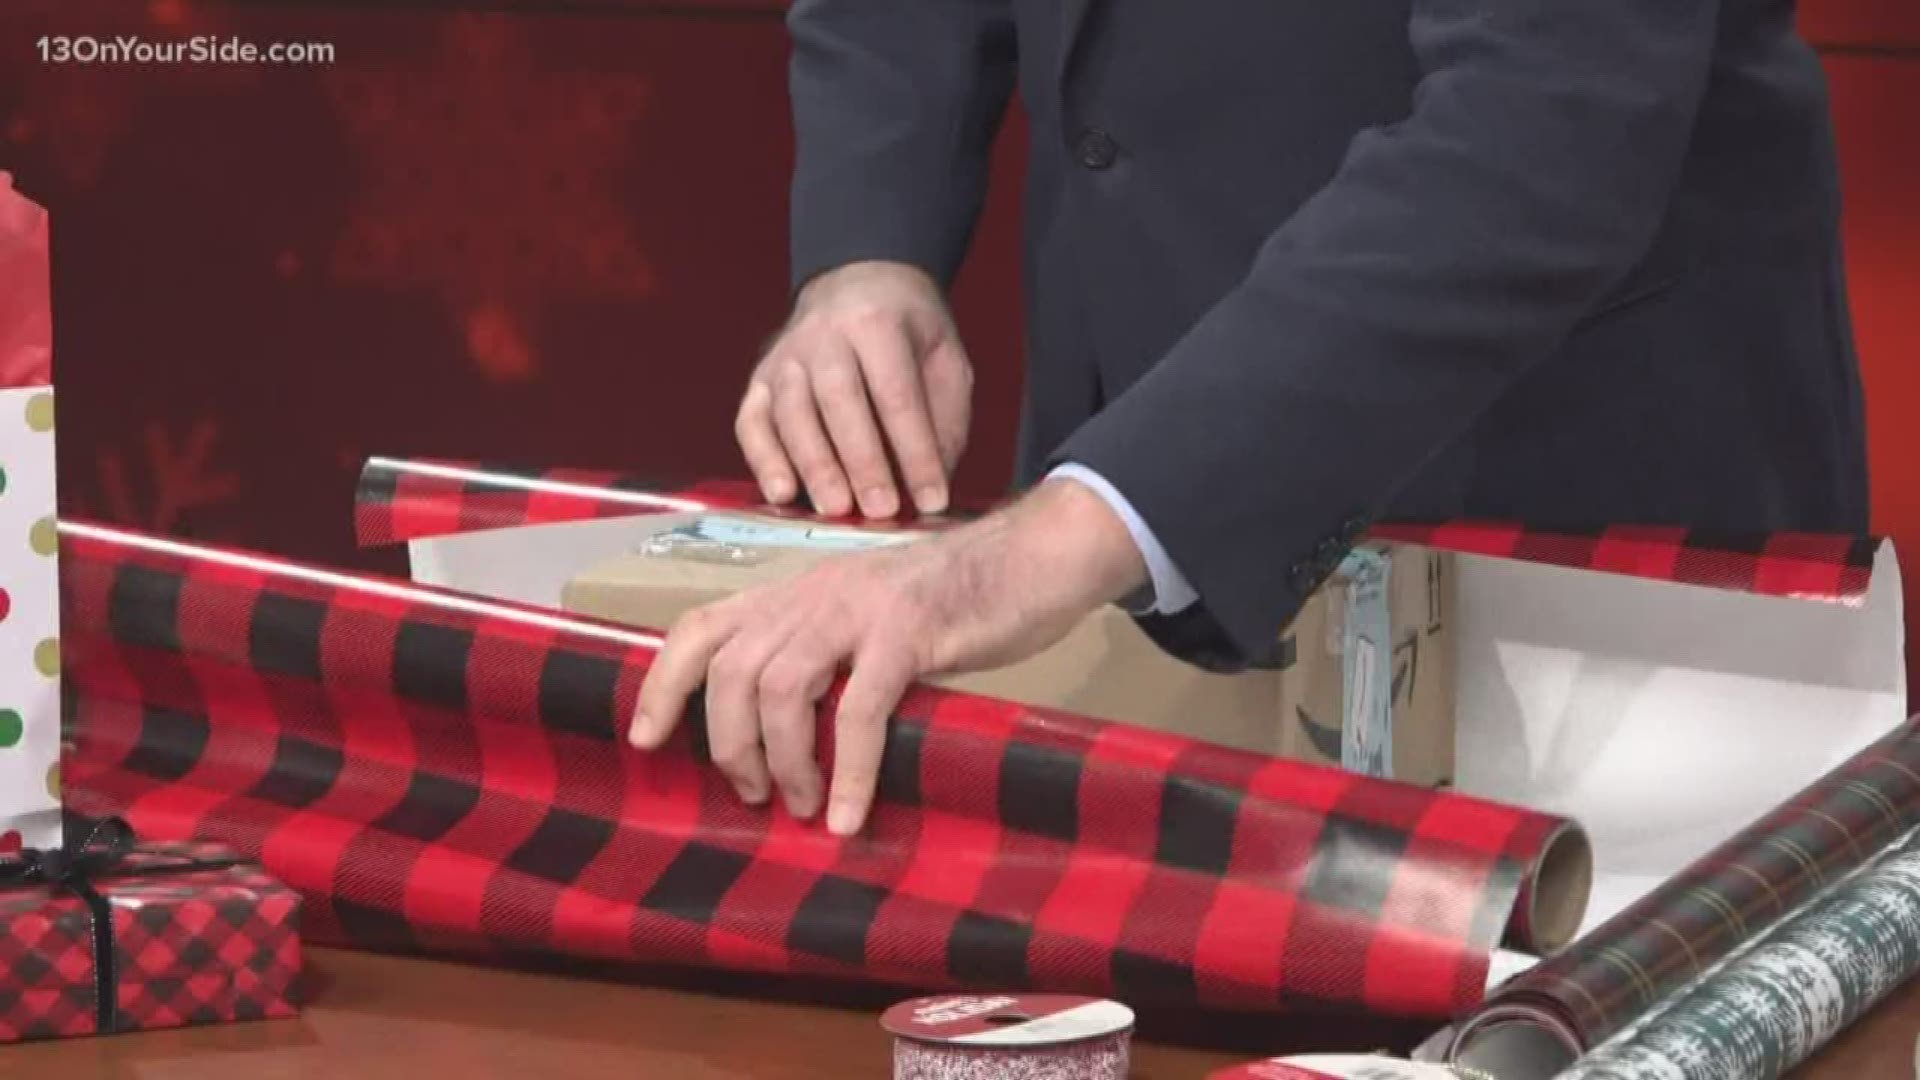 Lifestyle expert Sheila Gunneson shows us some tips and tricks to have those gifts looking their best!